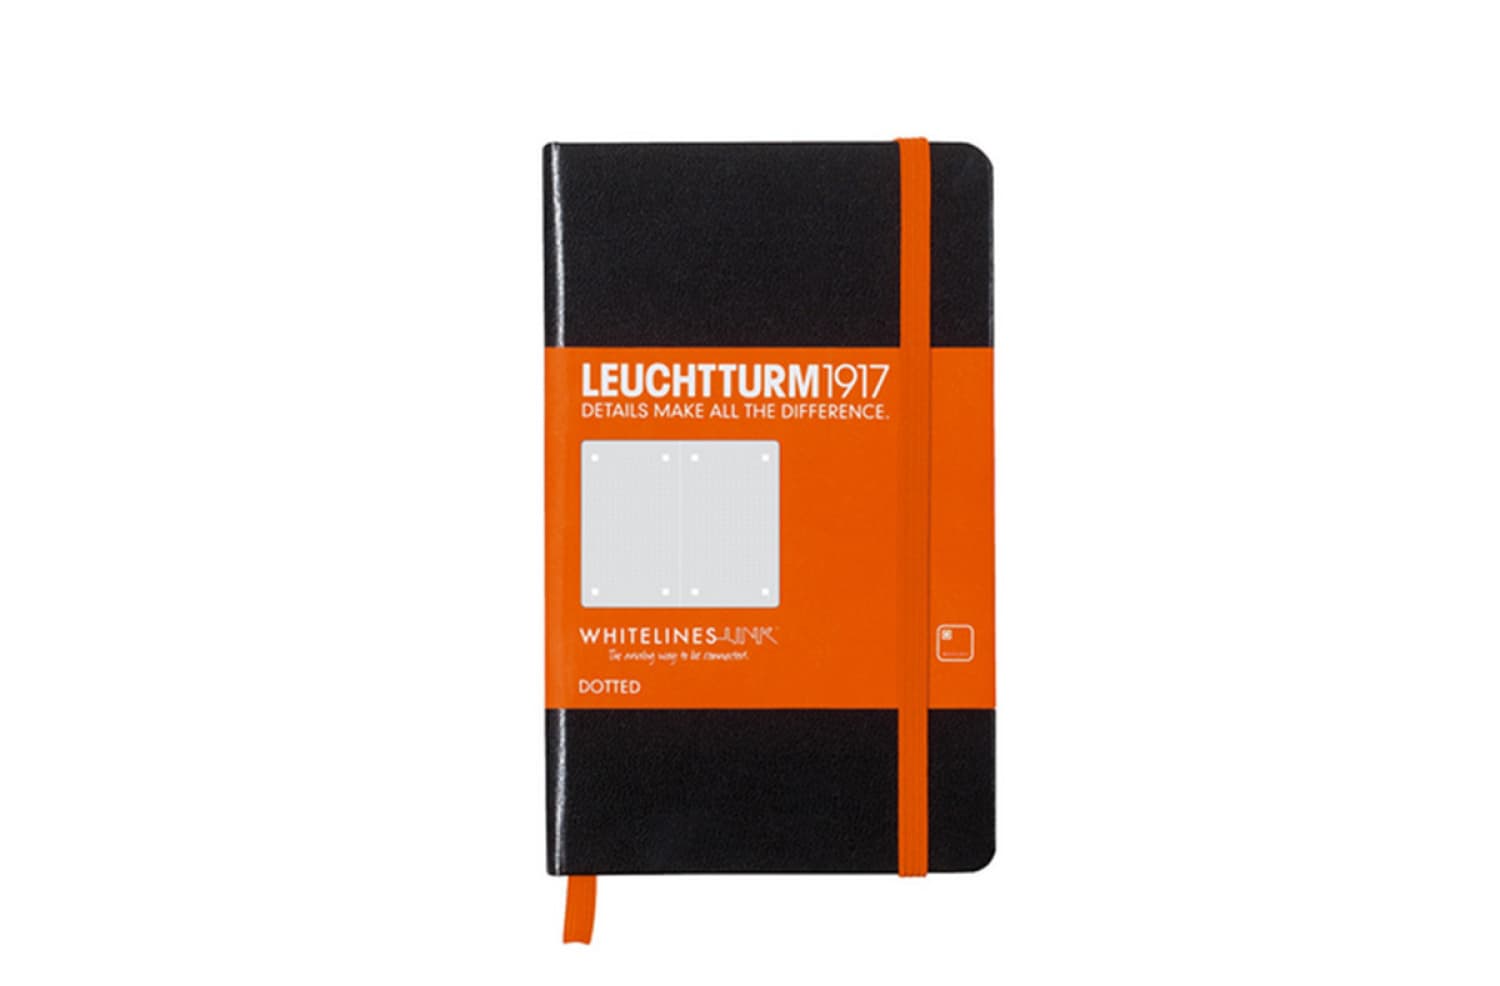 Paper Review: Other Leuchtturm 1917 Notebook Options (Part 1 of 3:  Whitelines Link) - The Well-Appointed Desk